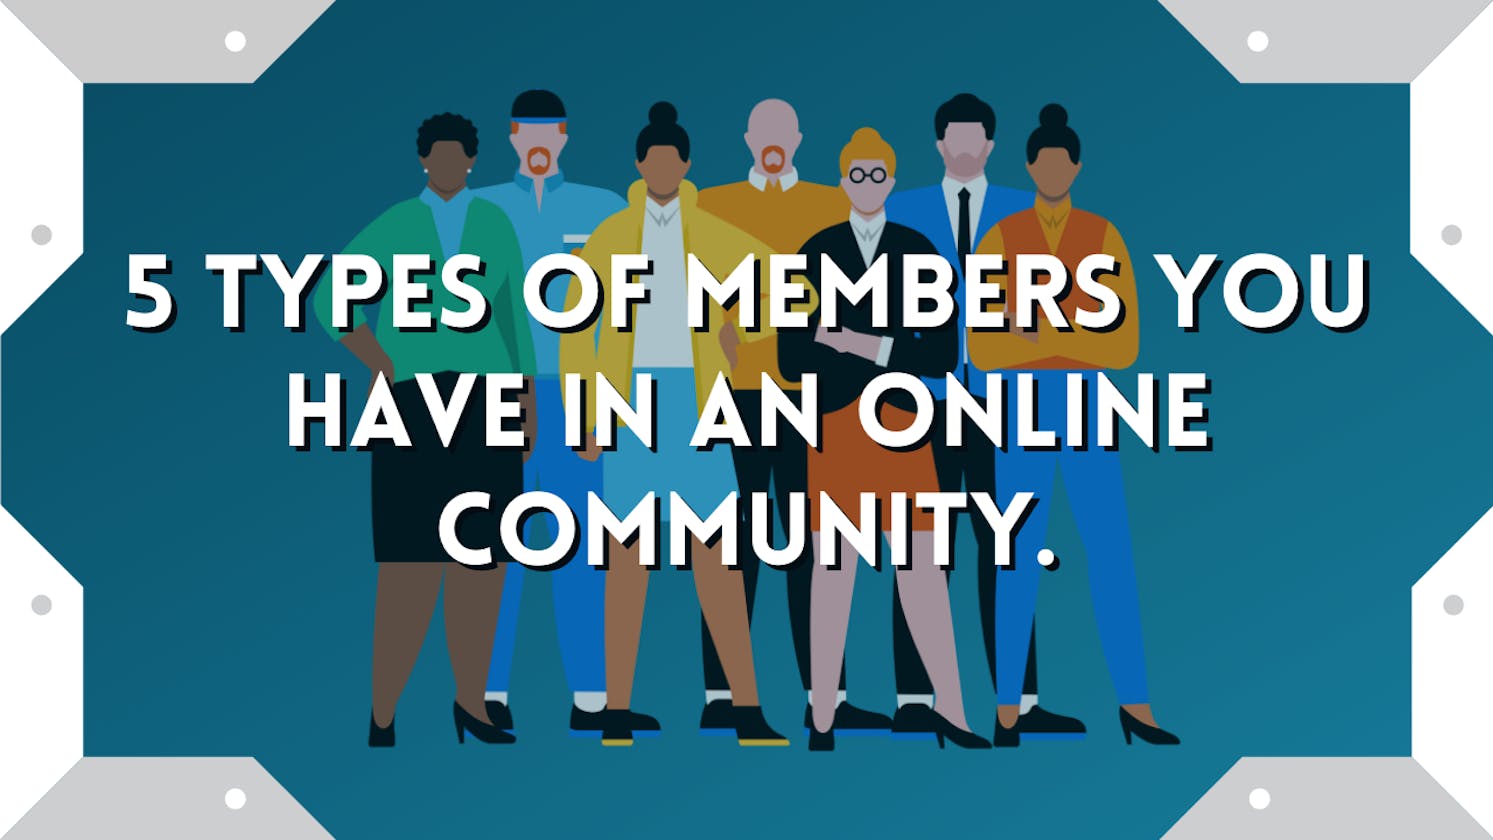 5 types of members you have in an Online Community.